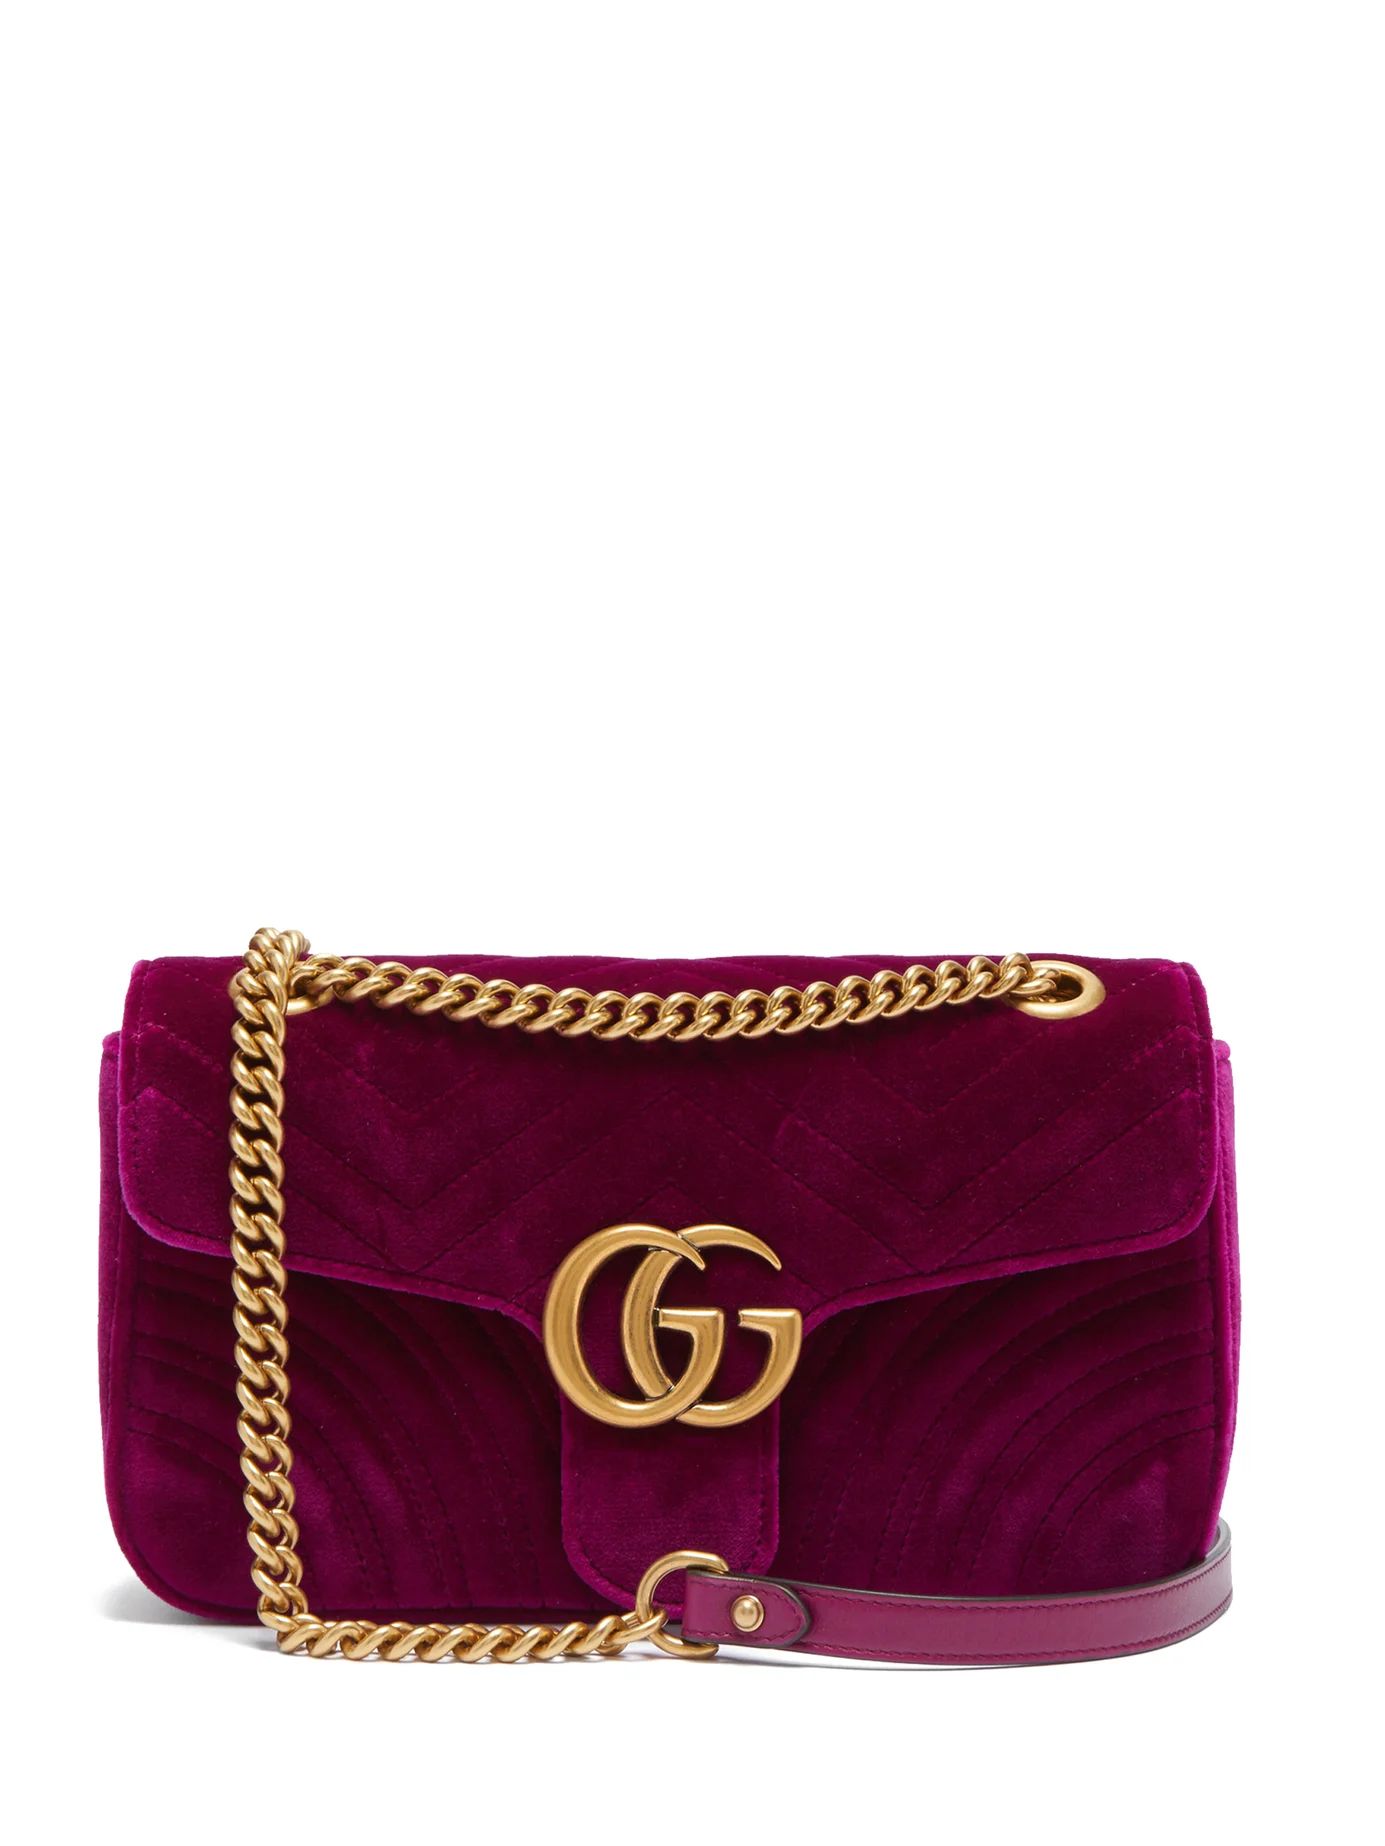 GG Marmont quilted-velvet cross-body bag | Matches (US)